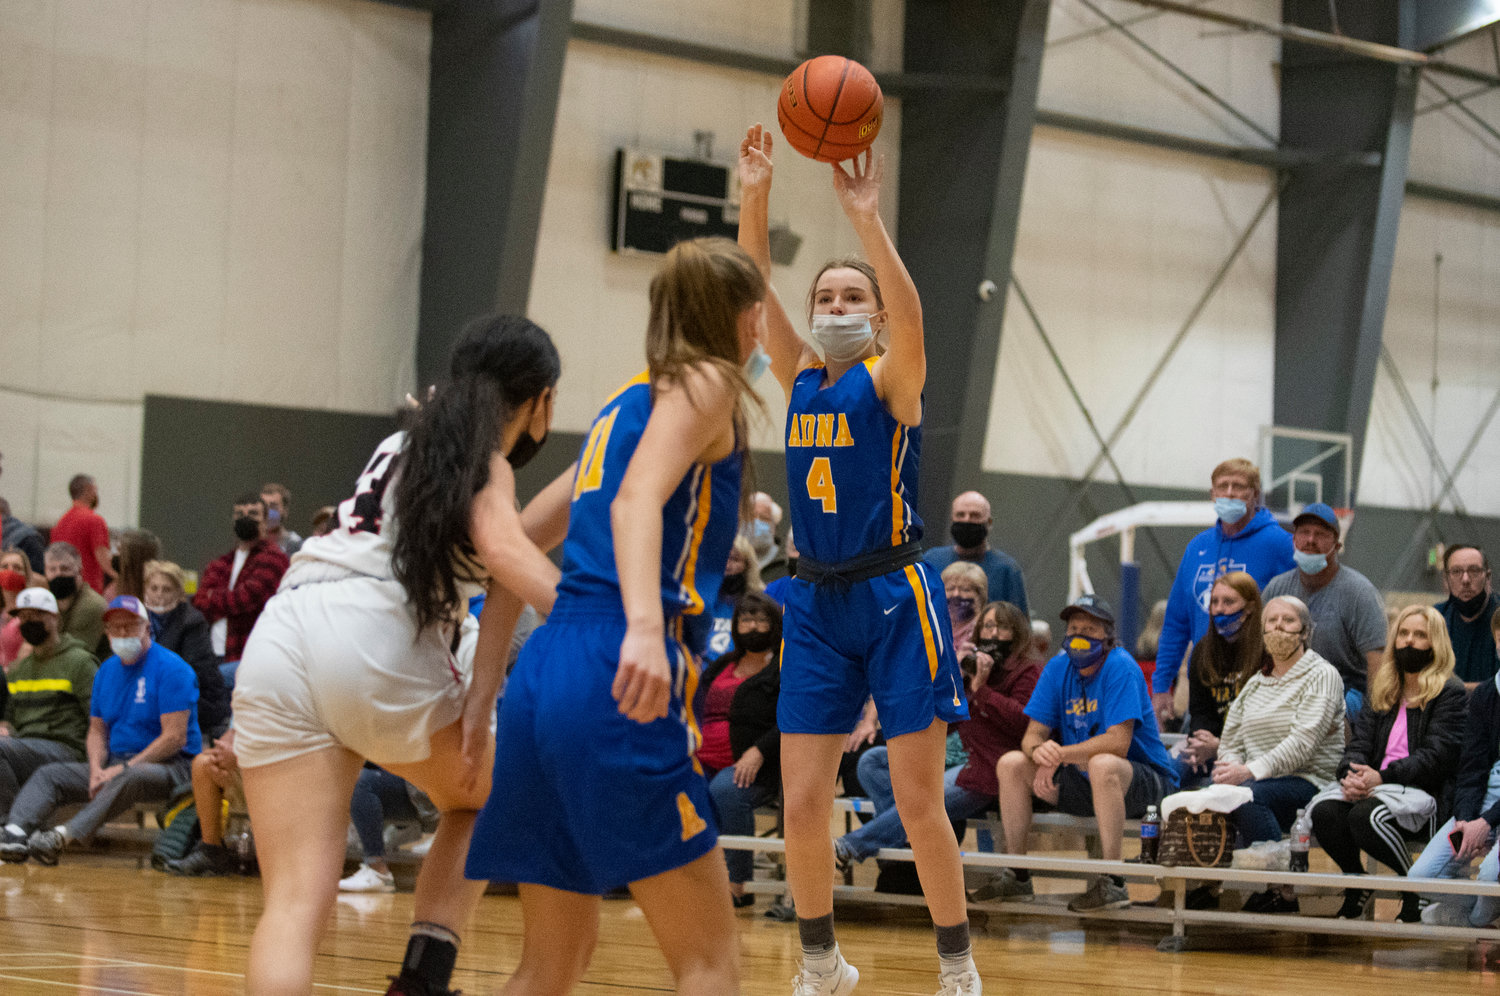 Adna sophomore Brooklyn Loose (4) shoots a 3-pointer against Toledo on Wednesday.